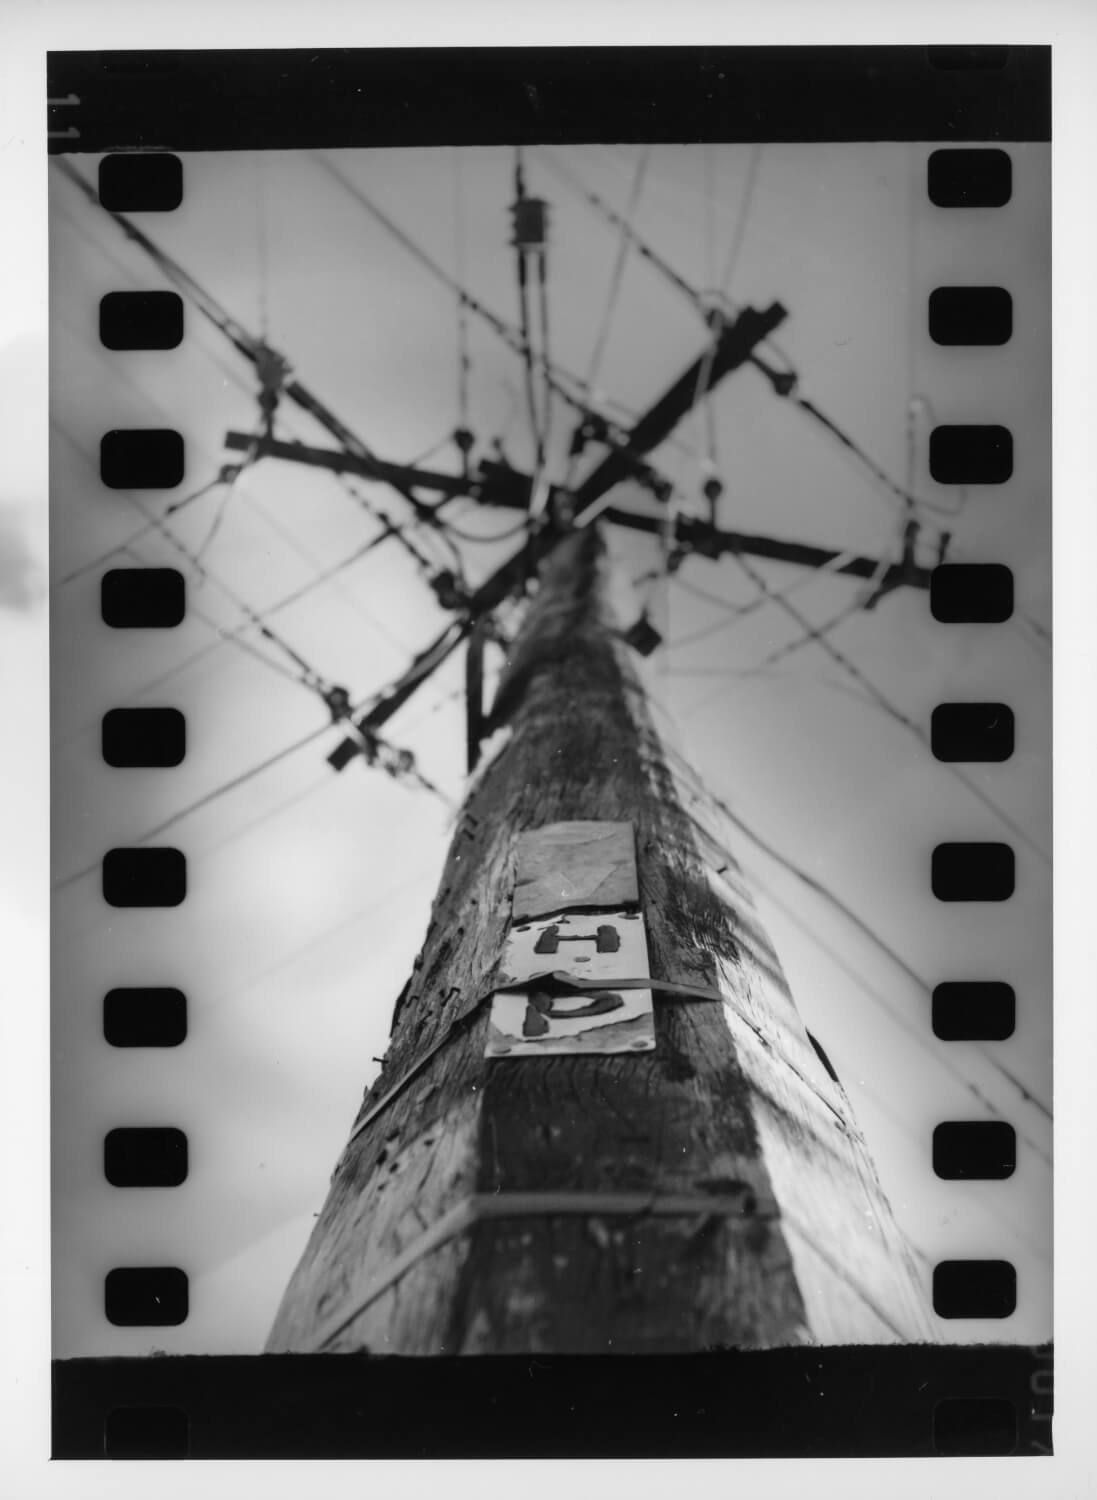 Scanned darkroom print of a pole, taken on the Yashica 44.  The darkroom also became a great source of comfort and creativity during this ongoing lockdown.